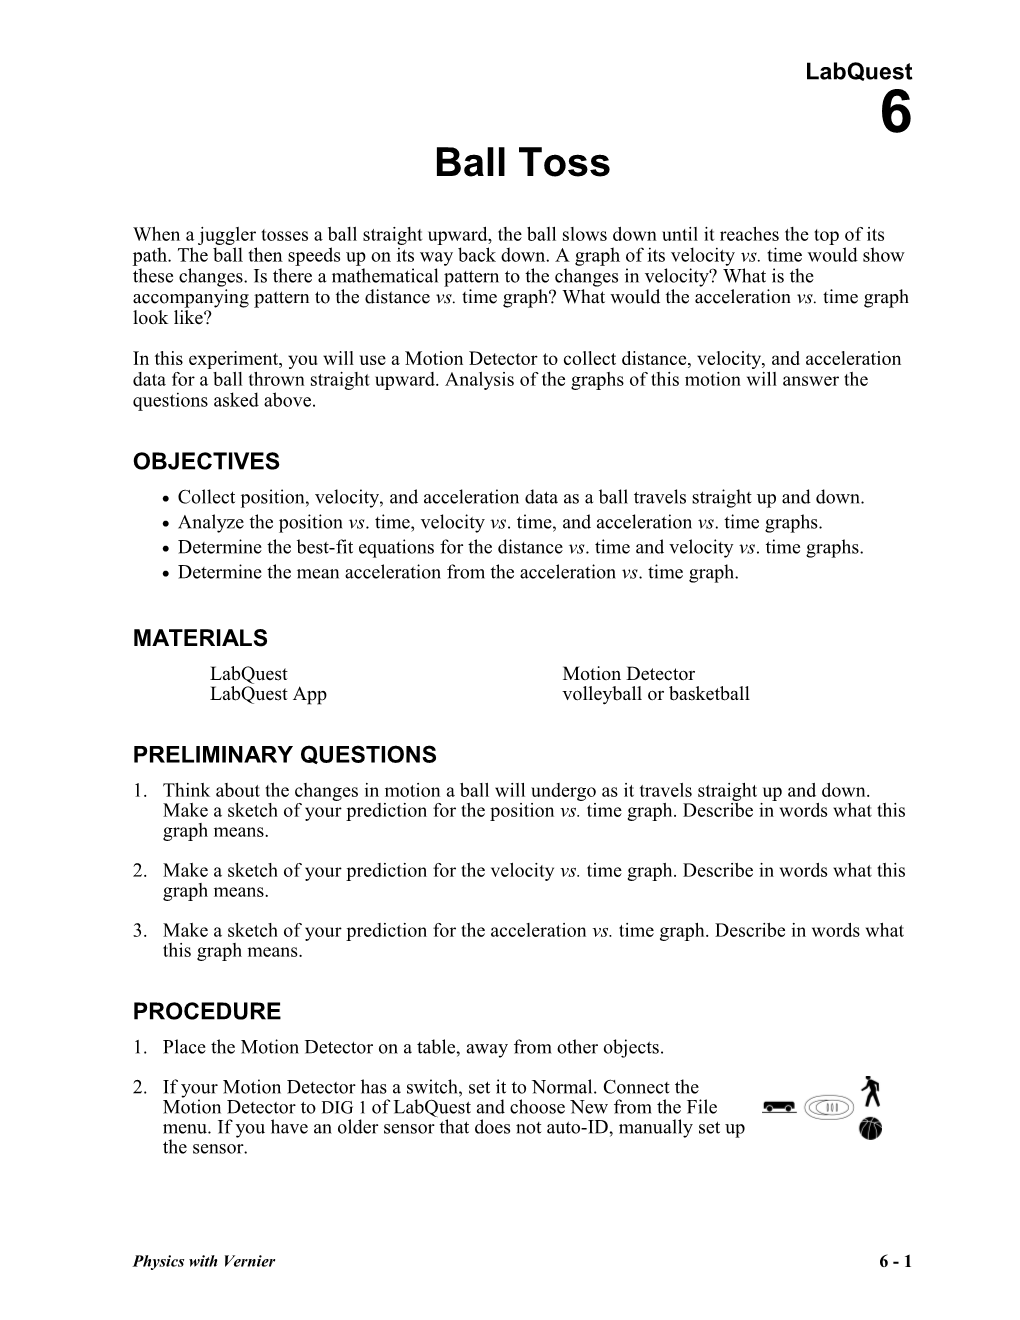 Collect Position, Velocity, and Acceleration Data As a Ball Travels Straight up and Down